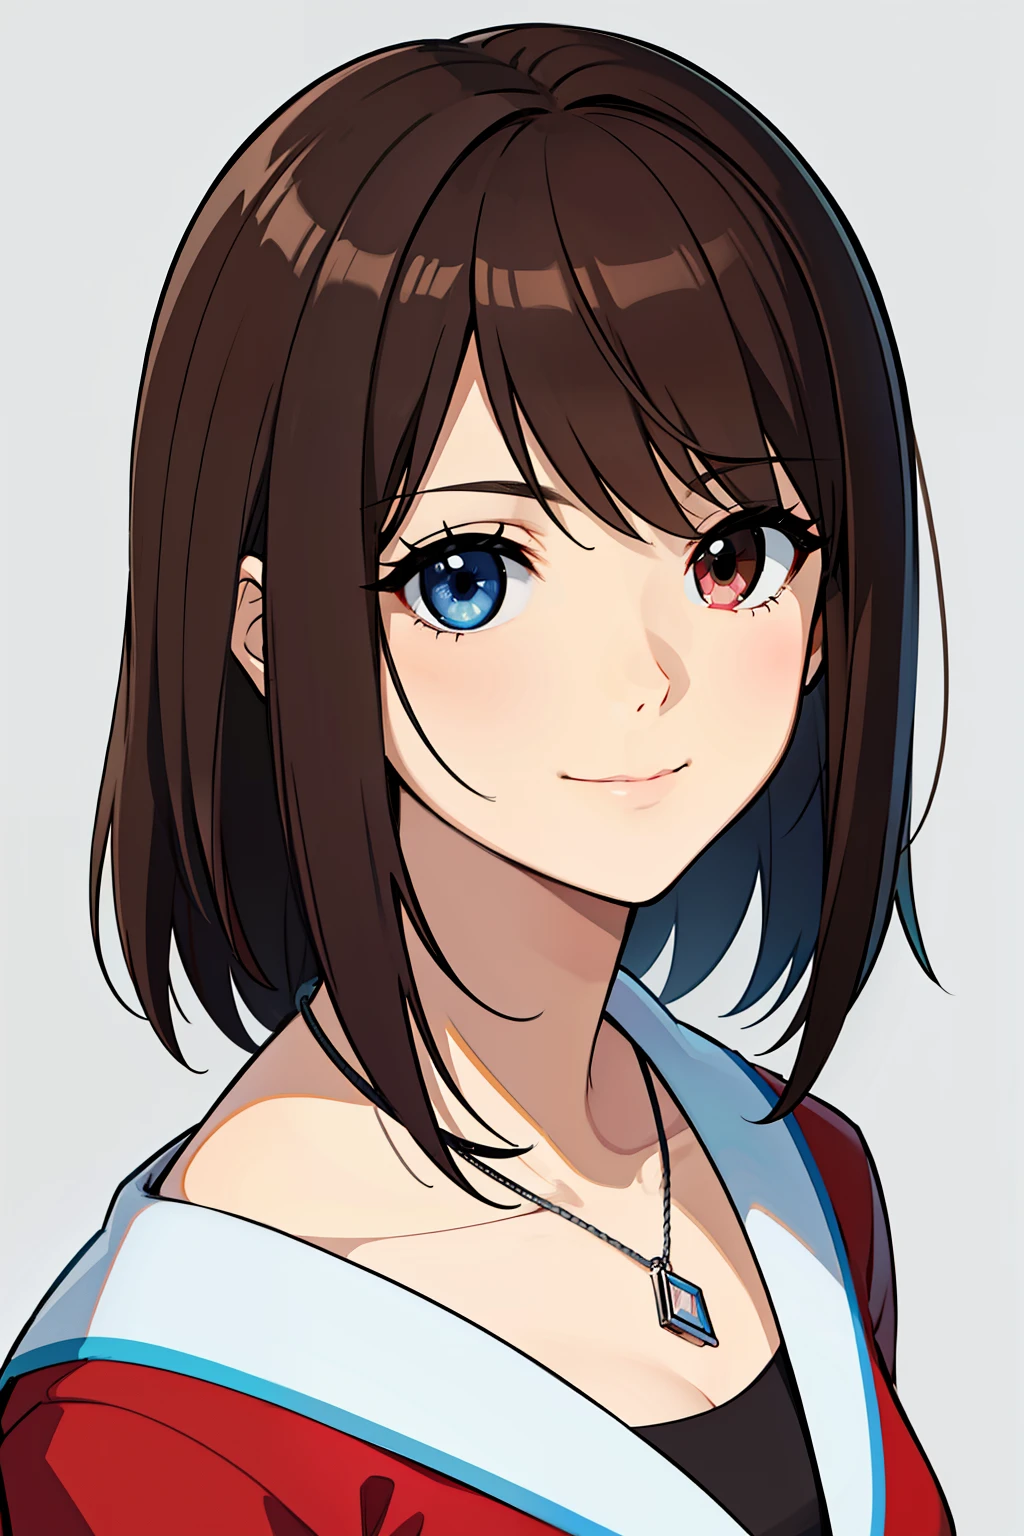 (high-quality, breathtaking),(expressive eyes, perfect face) portrait, 1girl, female, solo, adult woman, mum, age late 20's, brown hair, Heterochromia left eye brown and right eye light blue, short hair shoulder length, white ribbon in hair, gentle smile, loose hair, side bangs, looking at viewer, portrait, happy expression, modern clothing, red and blue jacket, red blouse, black jeans, small necklace shapped elegent, mature, height 5"6